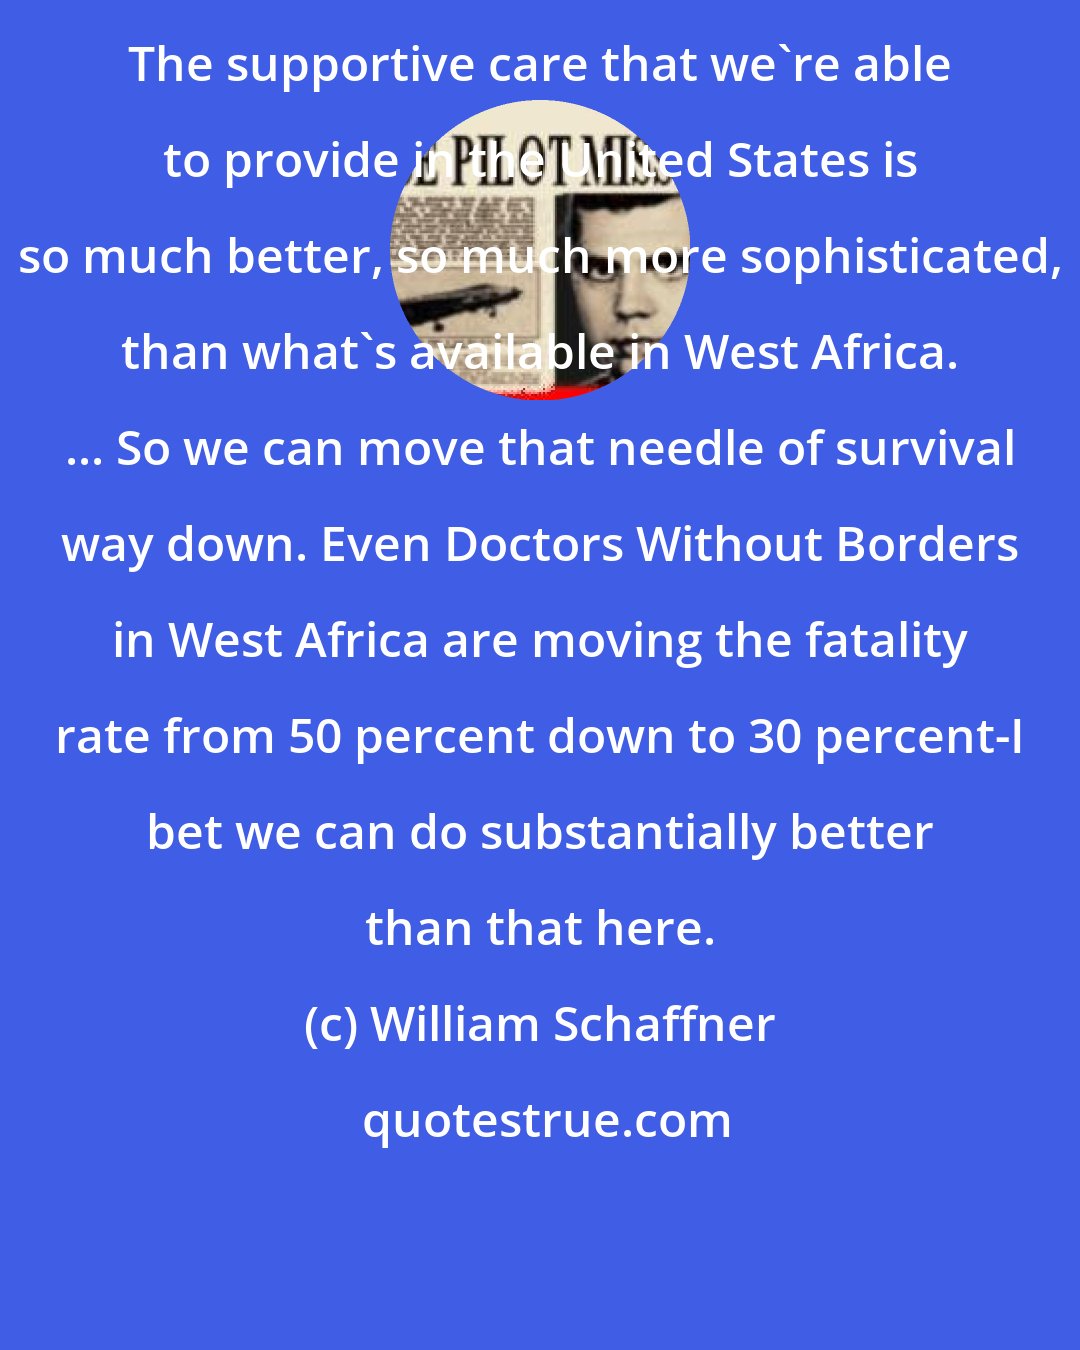 William Schaffner: The supportive care that we're able to provide in the United States is so much better, so much more sophisticated, than what's available in West Africa. ... So we can move that needle of survival way down. Even Doctors Without Borders in West Africa are moving the fatality rate from 50 percent down to 30 percent-I bet we can do substantially better than that here.